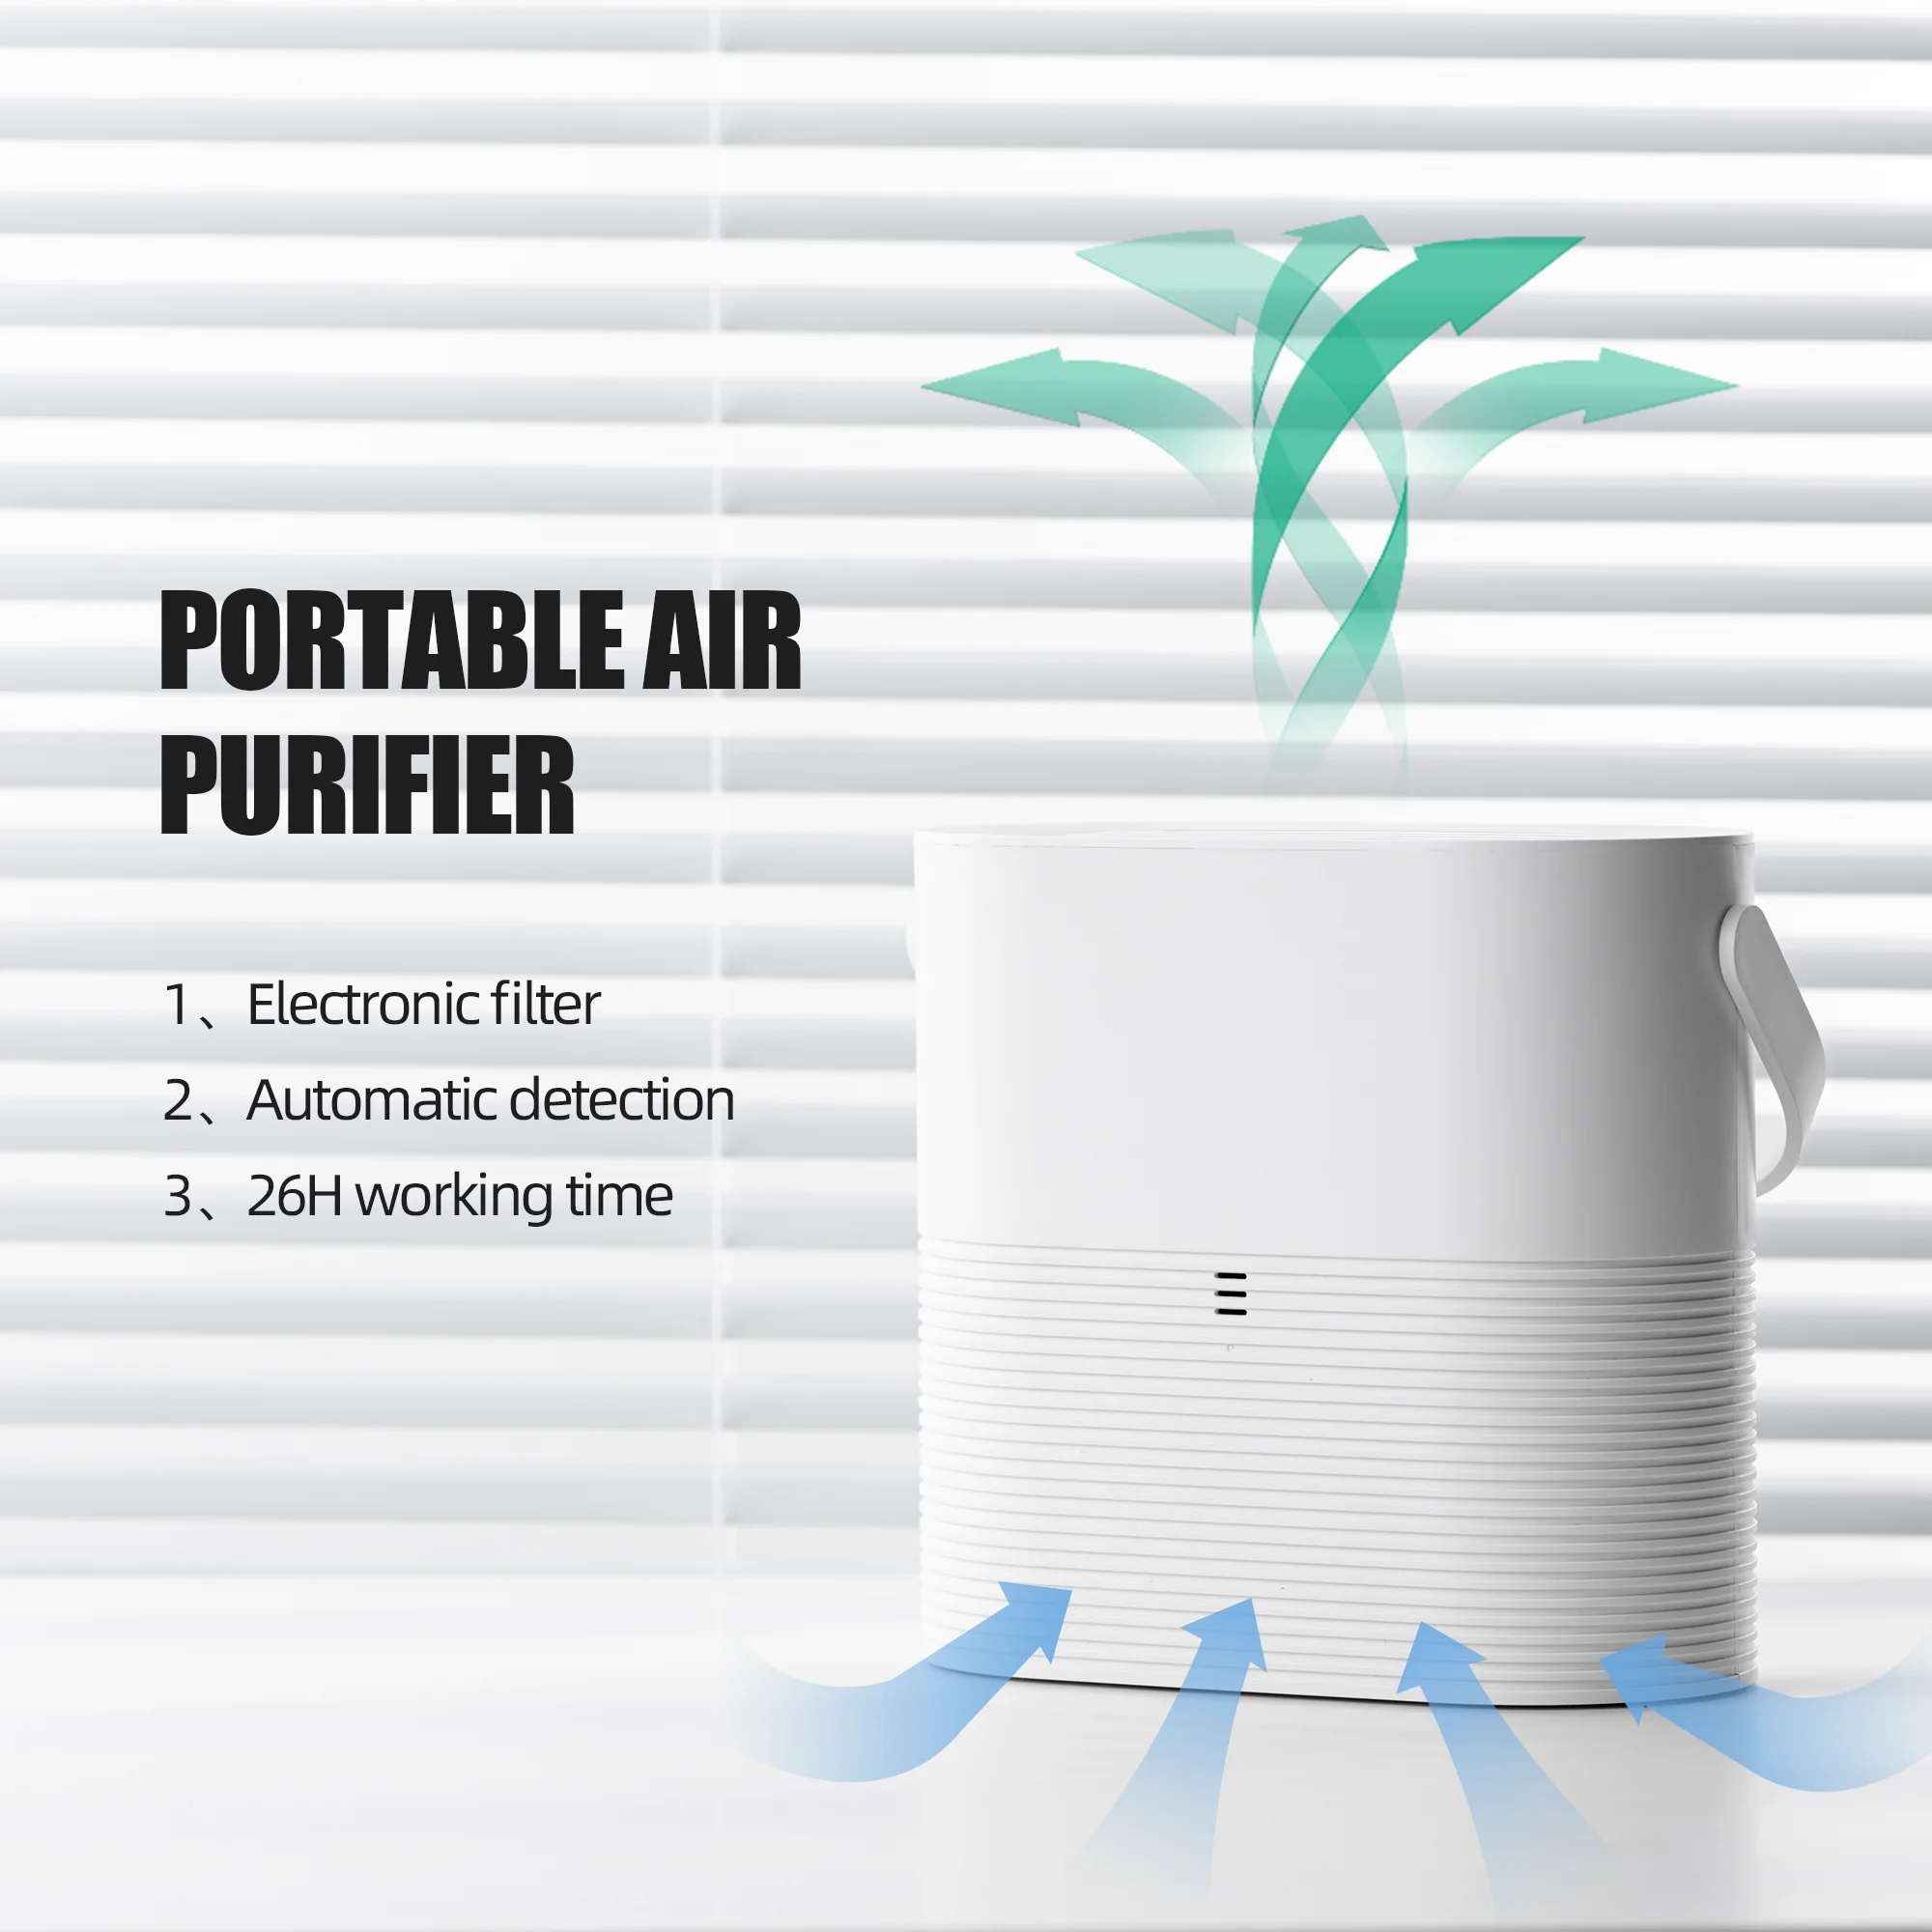 

Air Purifier with Electronic Filter Portable Air Cleaner Adsorption Of Pm2.5 Dust Formaldehyde For Pollen Allergy Sufferers